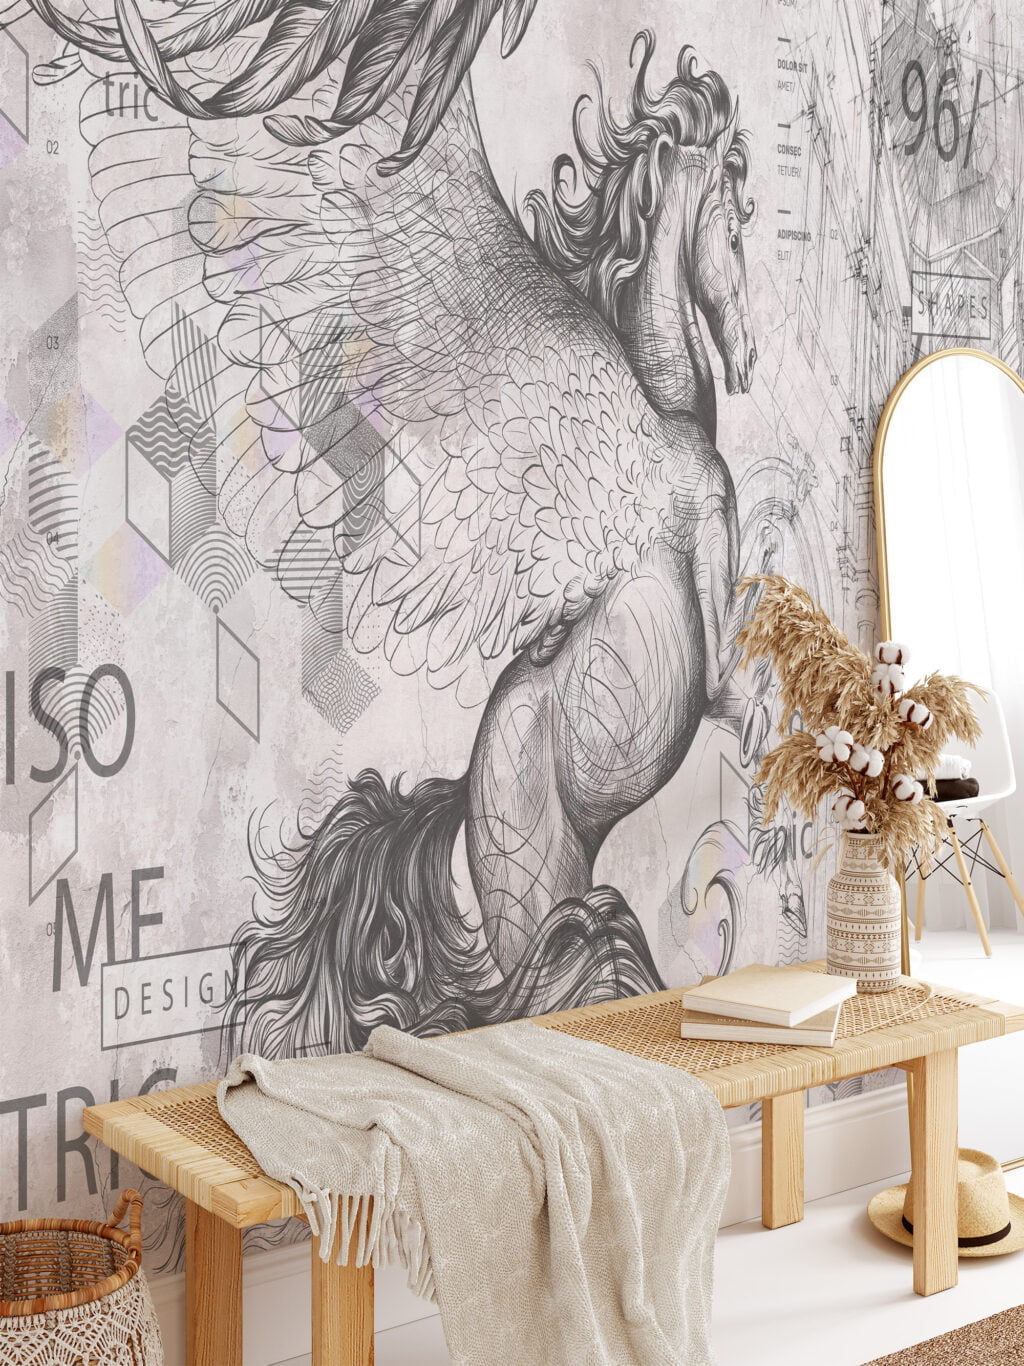 Abstract and Geometric Pegasus Wallpaper, Peel and Stick Temporary Self Adhesive Wall Mural, Modern Abstract Artistic Design